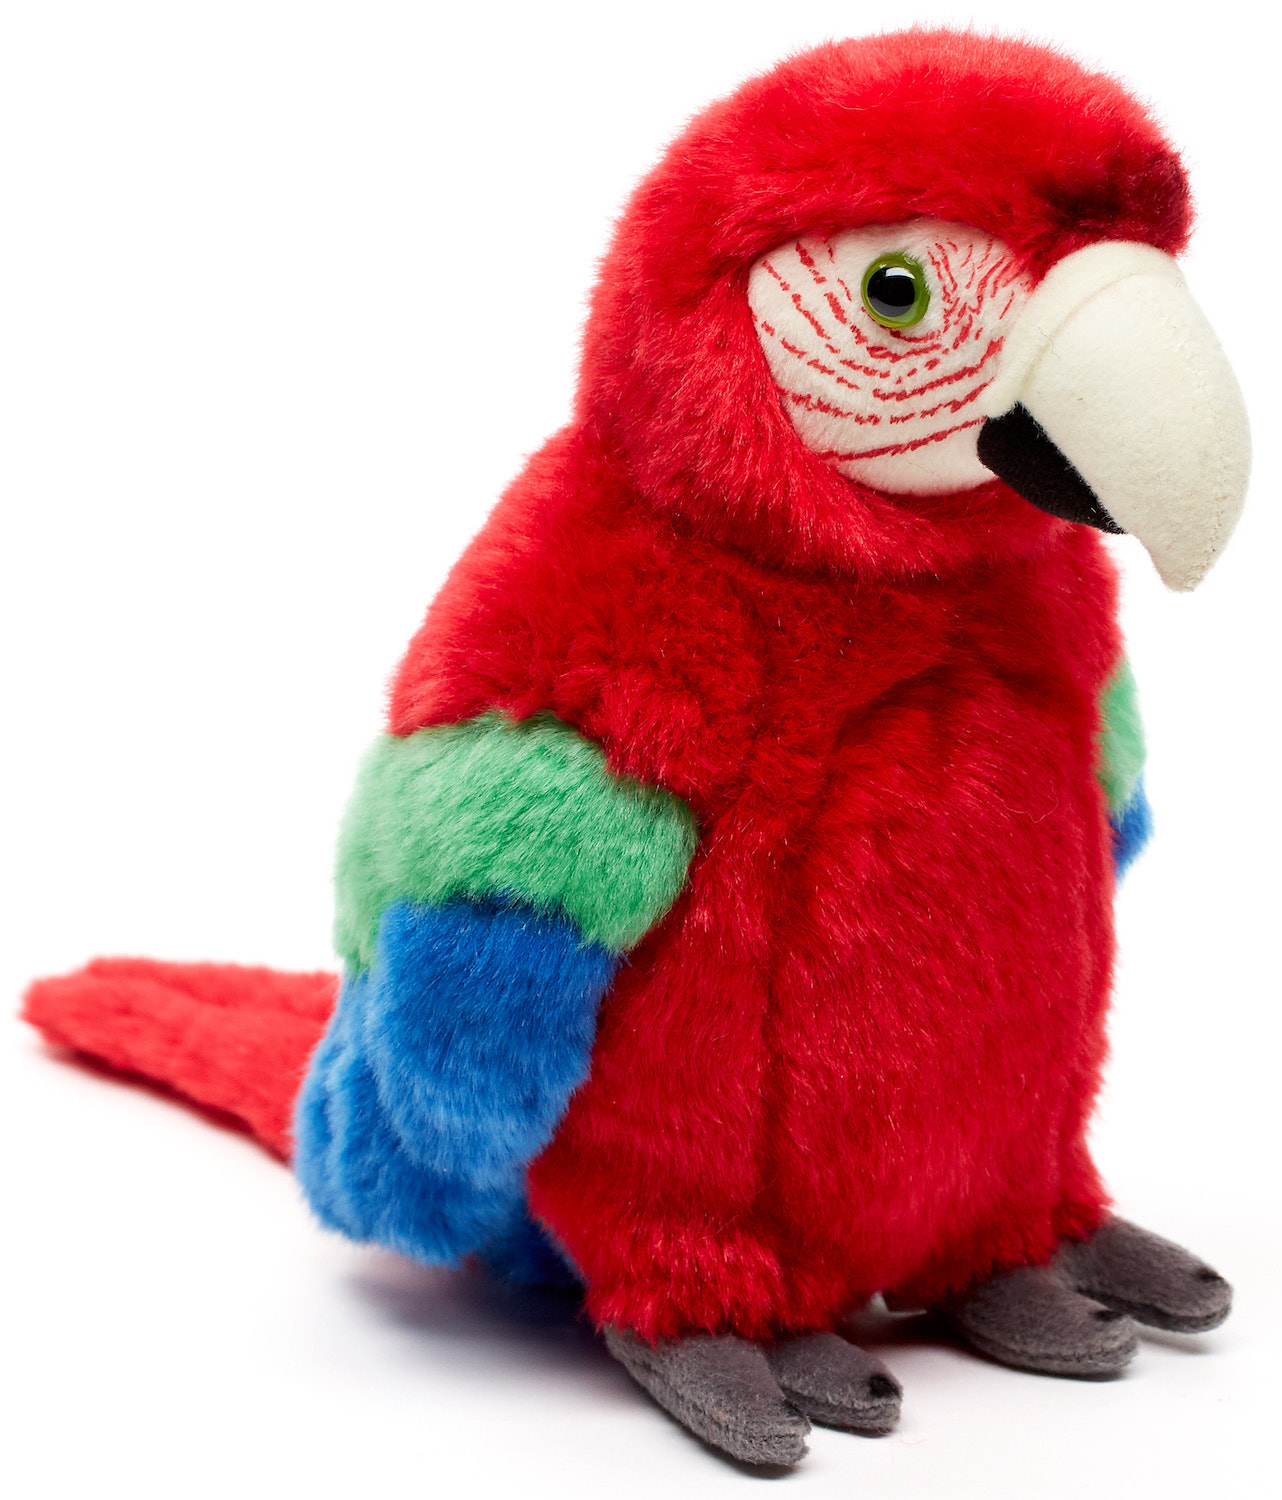 Parrot (red) - 24 cm (height) - plush bird, macaw - soft toy, cuddly toy